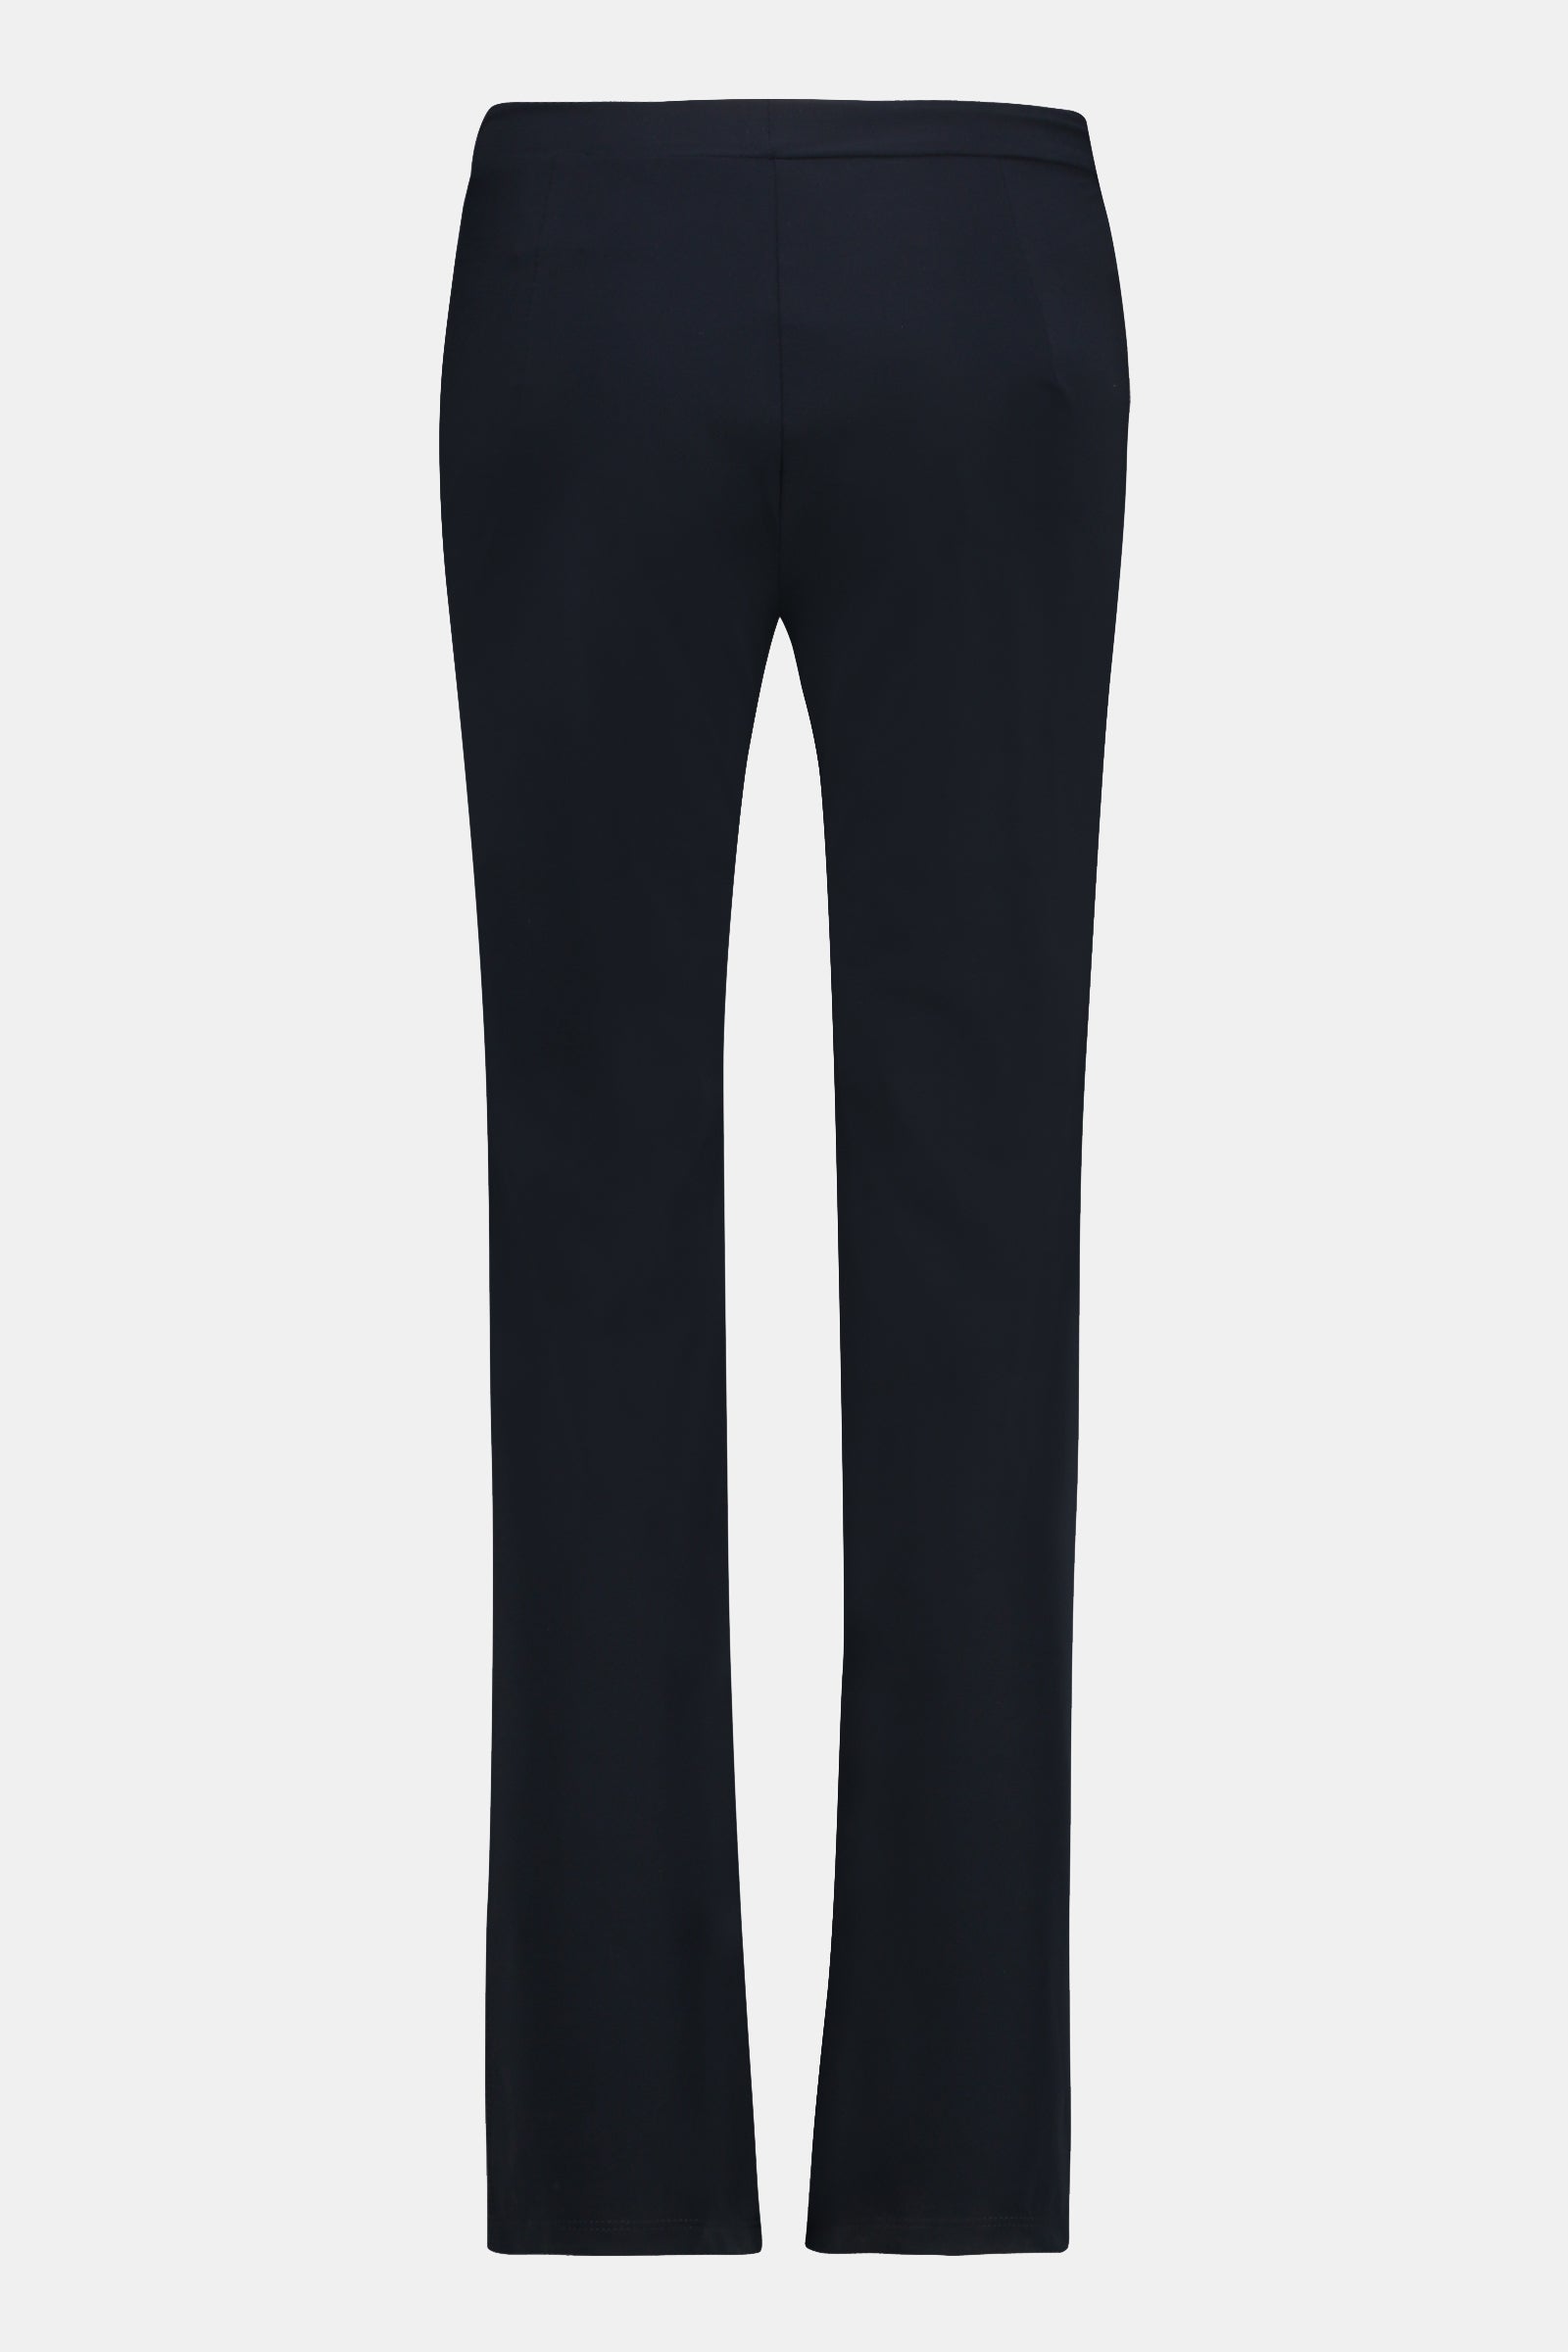 TROUSERS (DALLAS) NAVY